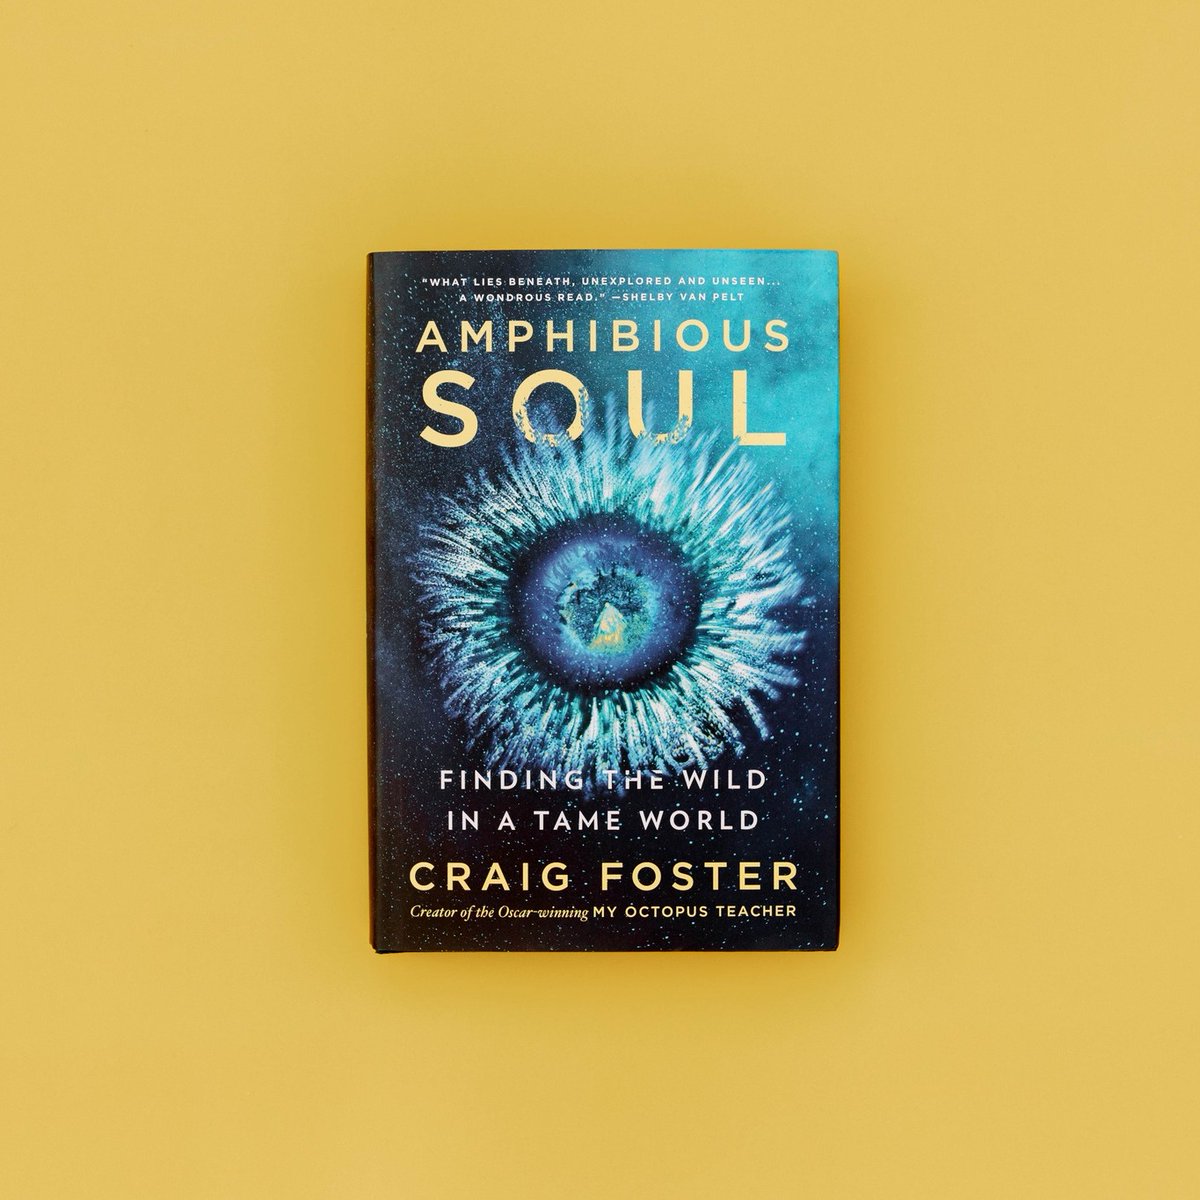 Amphibious Soul is 'a spiritual and urgent memoir,' according to @latimes. Read their full review of Craig Foster's riveting story—on sale now. lat.ms/3wAbWlu